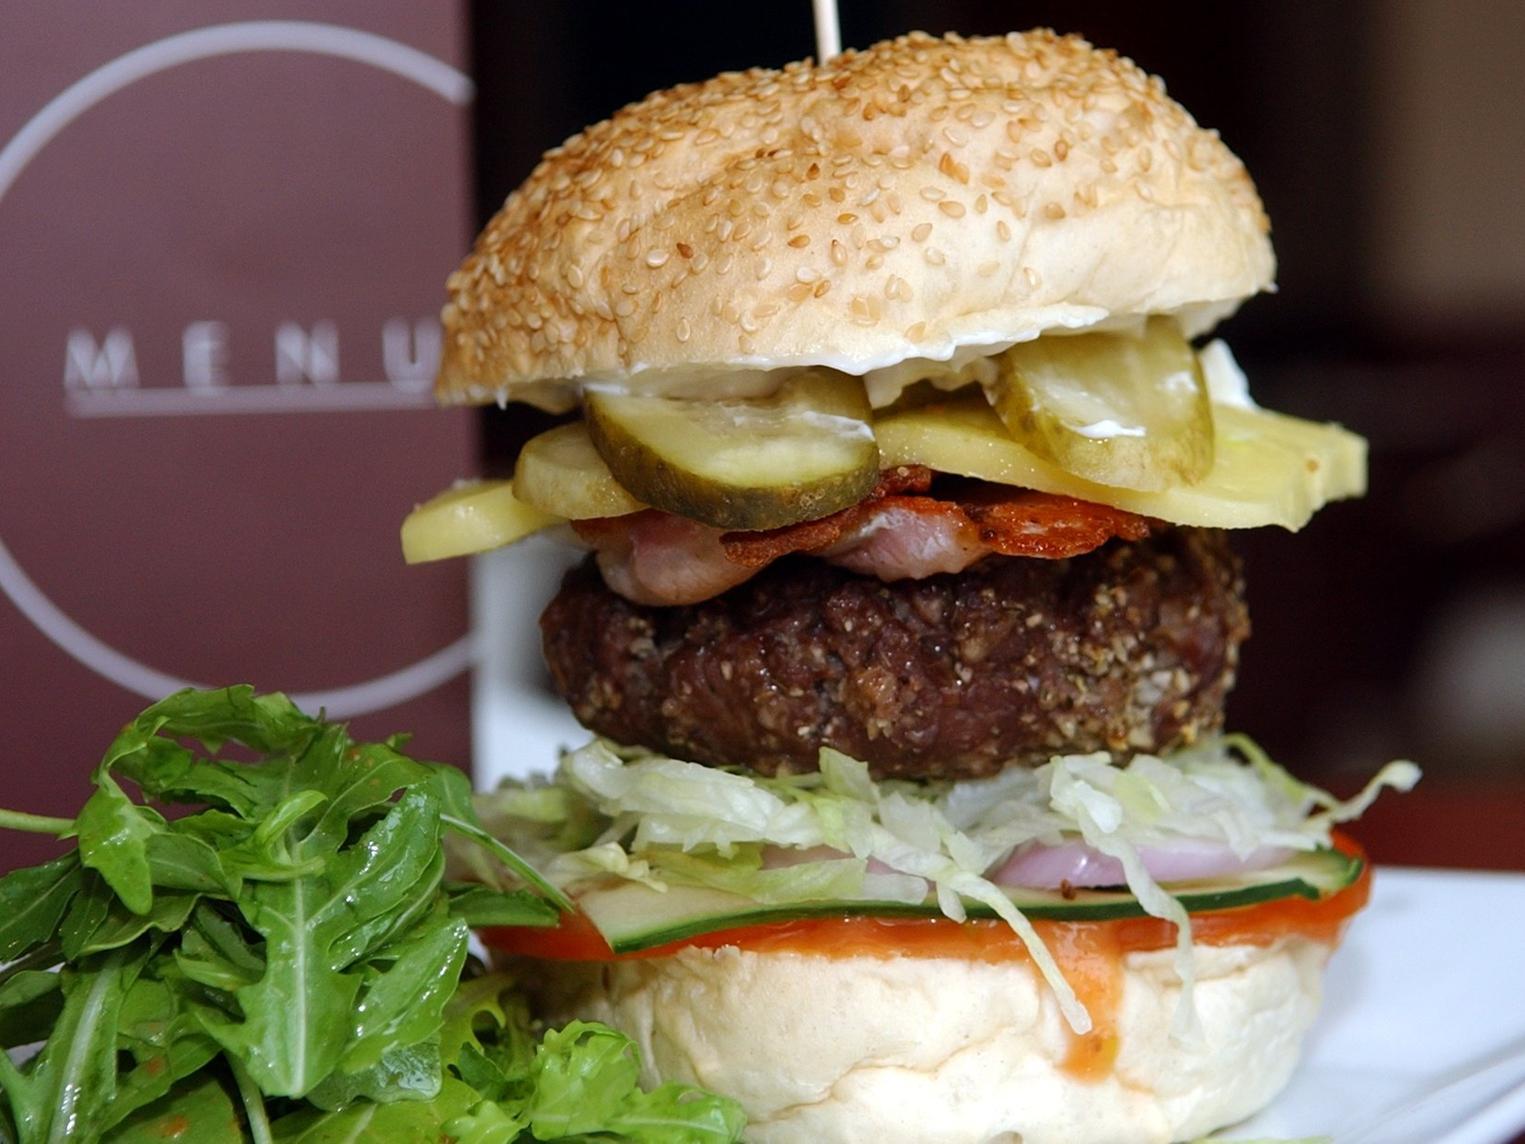 Oracle was recognised for its forward thinking foodie trends, being the first Leeds eatery to launch a gourmet burger menu.